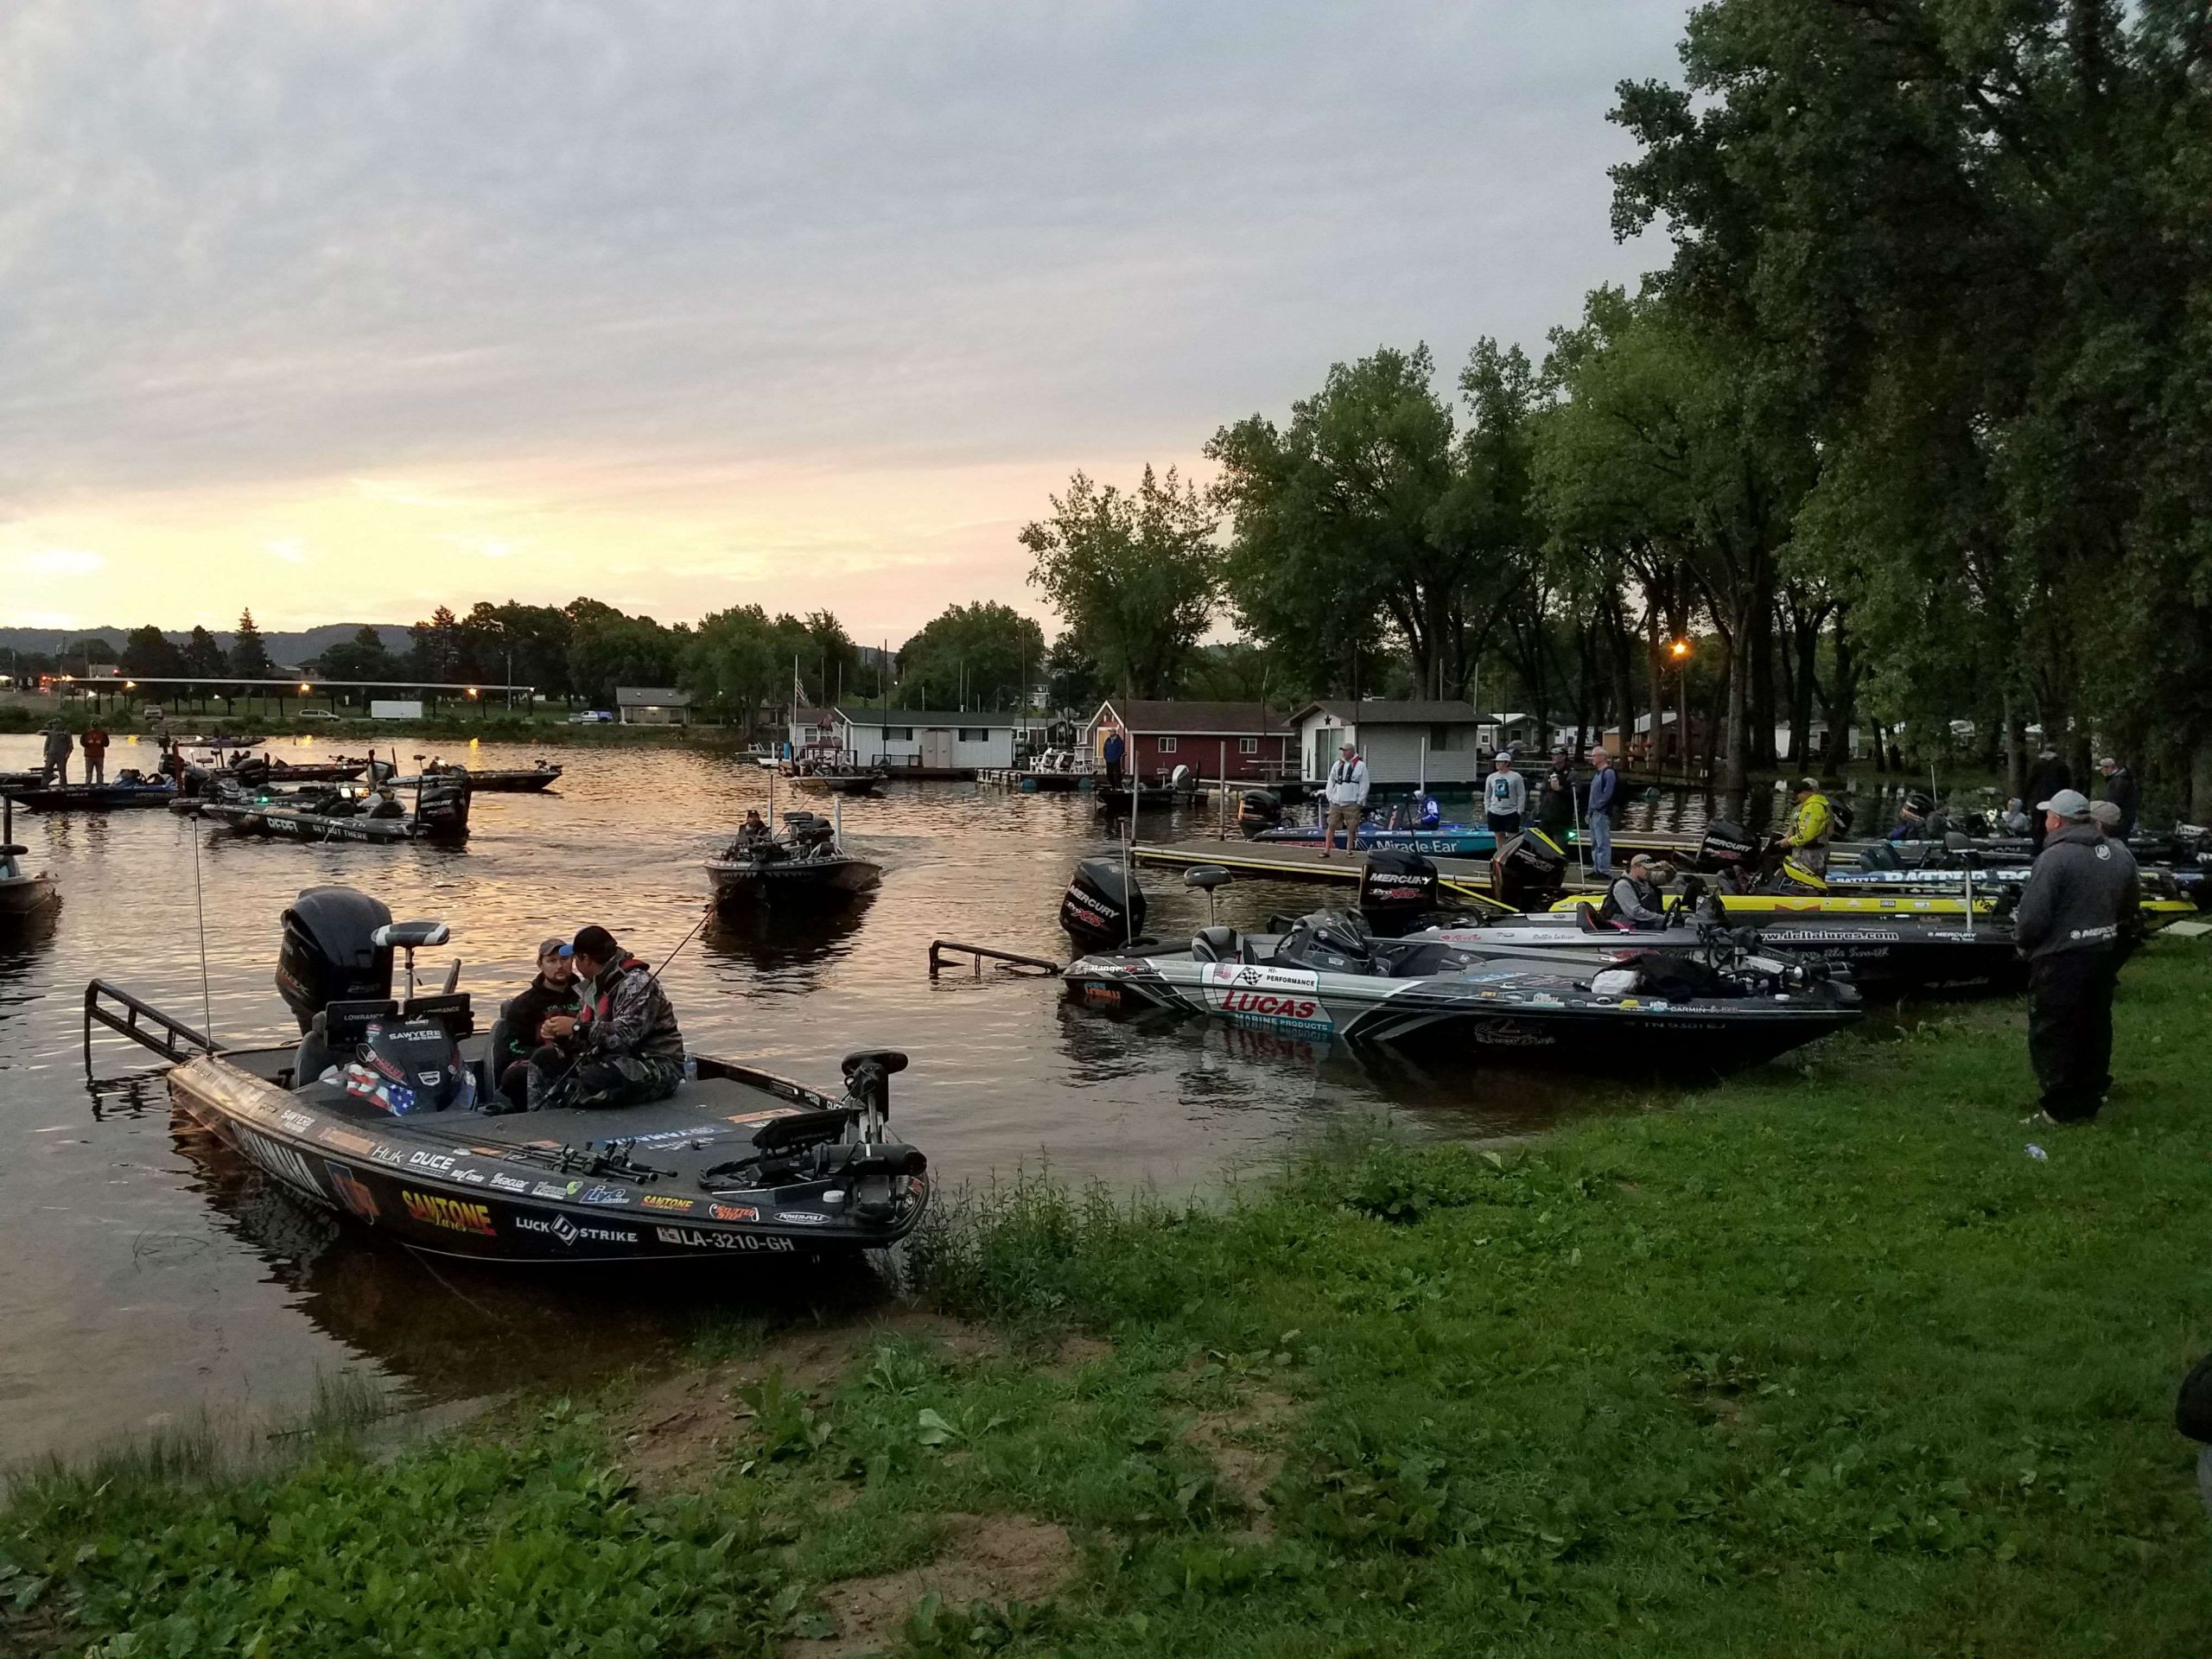 Getting ready for a beautiful Day 2 on the Mississippi River with the Bassmaster Elite Series! The rain has stopped and its time for some great bass fishing.